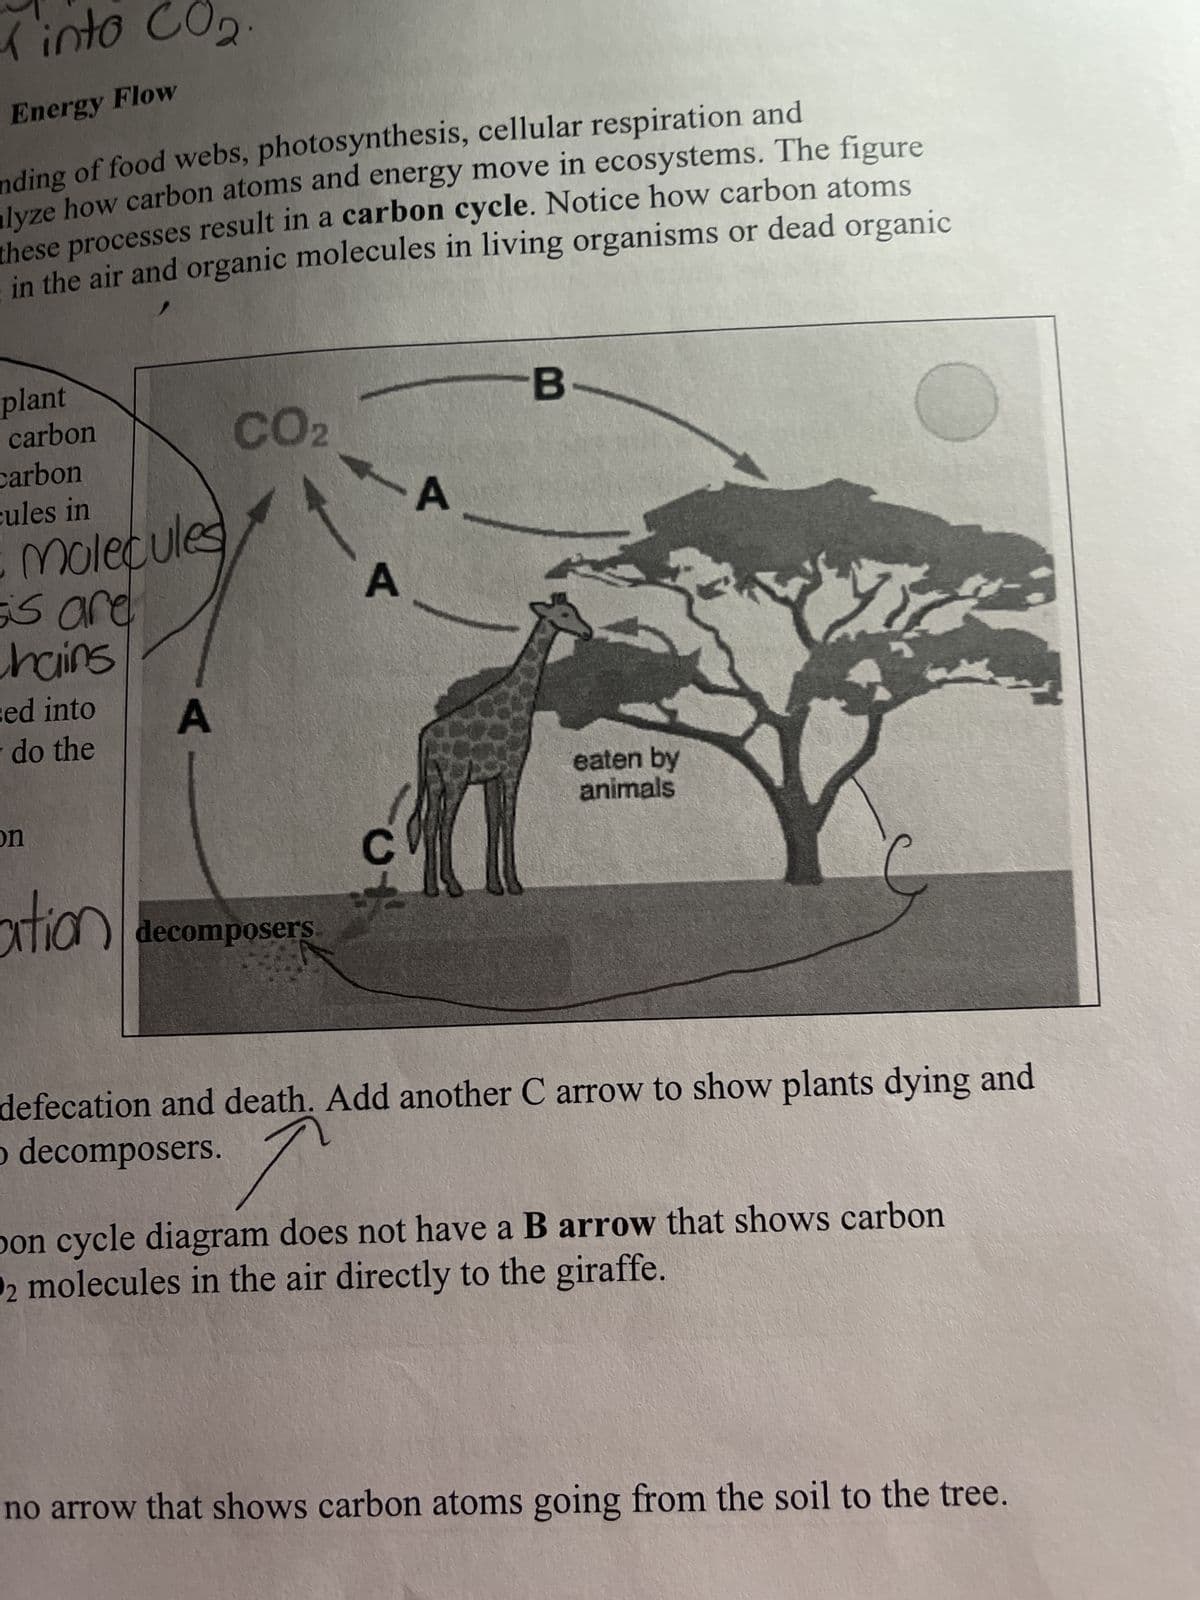 Energy Flow
nding of food webs, photosynthesis, cellular respiration and
alyze how carbon atoms and energy move in ecosystems. The figure
these processes result in a carbon cycle. Notice how carbon atoms
in the air and organic molecules in living organisms or dead organic
Kinto Co
plant
carbon
carbon
cules in
Molecules
sis are
chains
sed into
do the
(2
on
A
CO₂
ation decomposers
A
с
A
-B
eaten by
animals
defecation and death. Add another C arrow to show plants dying and
o decomposers.
↑
bon cycle diagram does not have a B arrow that shows carbon
2 molecules in the air directly to the giraffe.
no arrow that shows carbon atoms going from the soil to the tree.